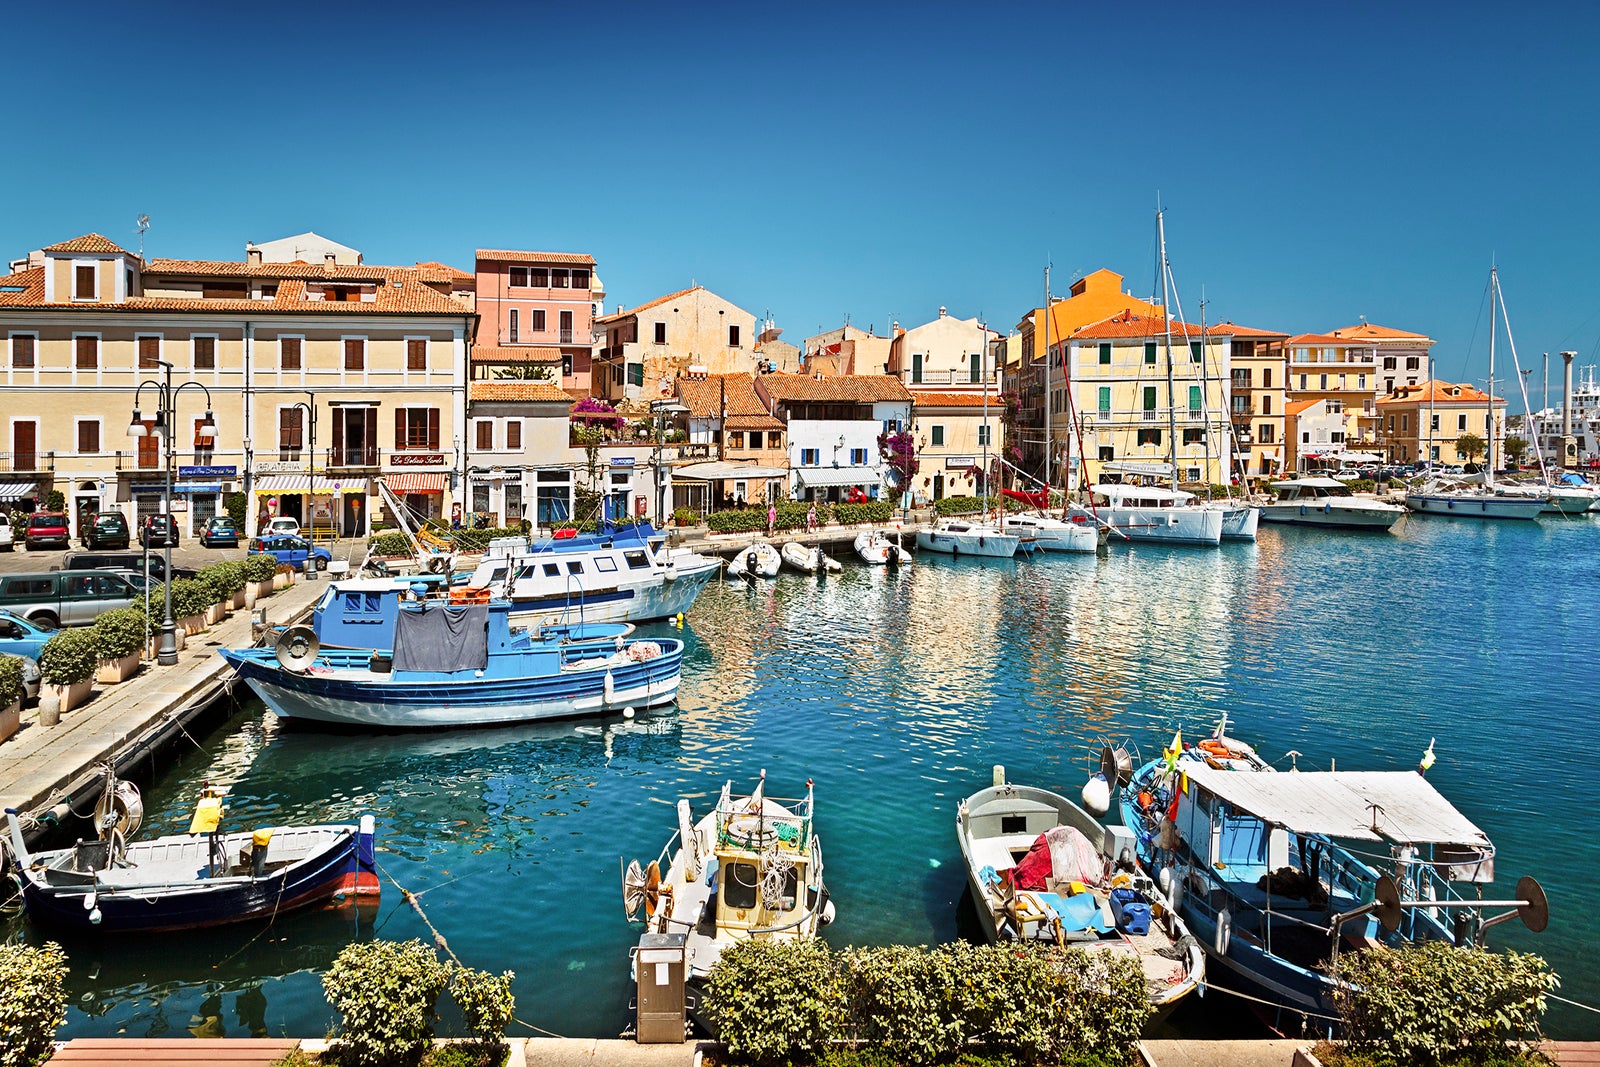 Marina and view over La Maddalena, the largest town in the Maddalena archipelago at the Costa Smeraldo